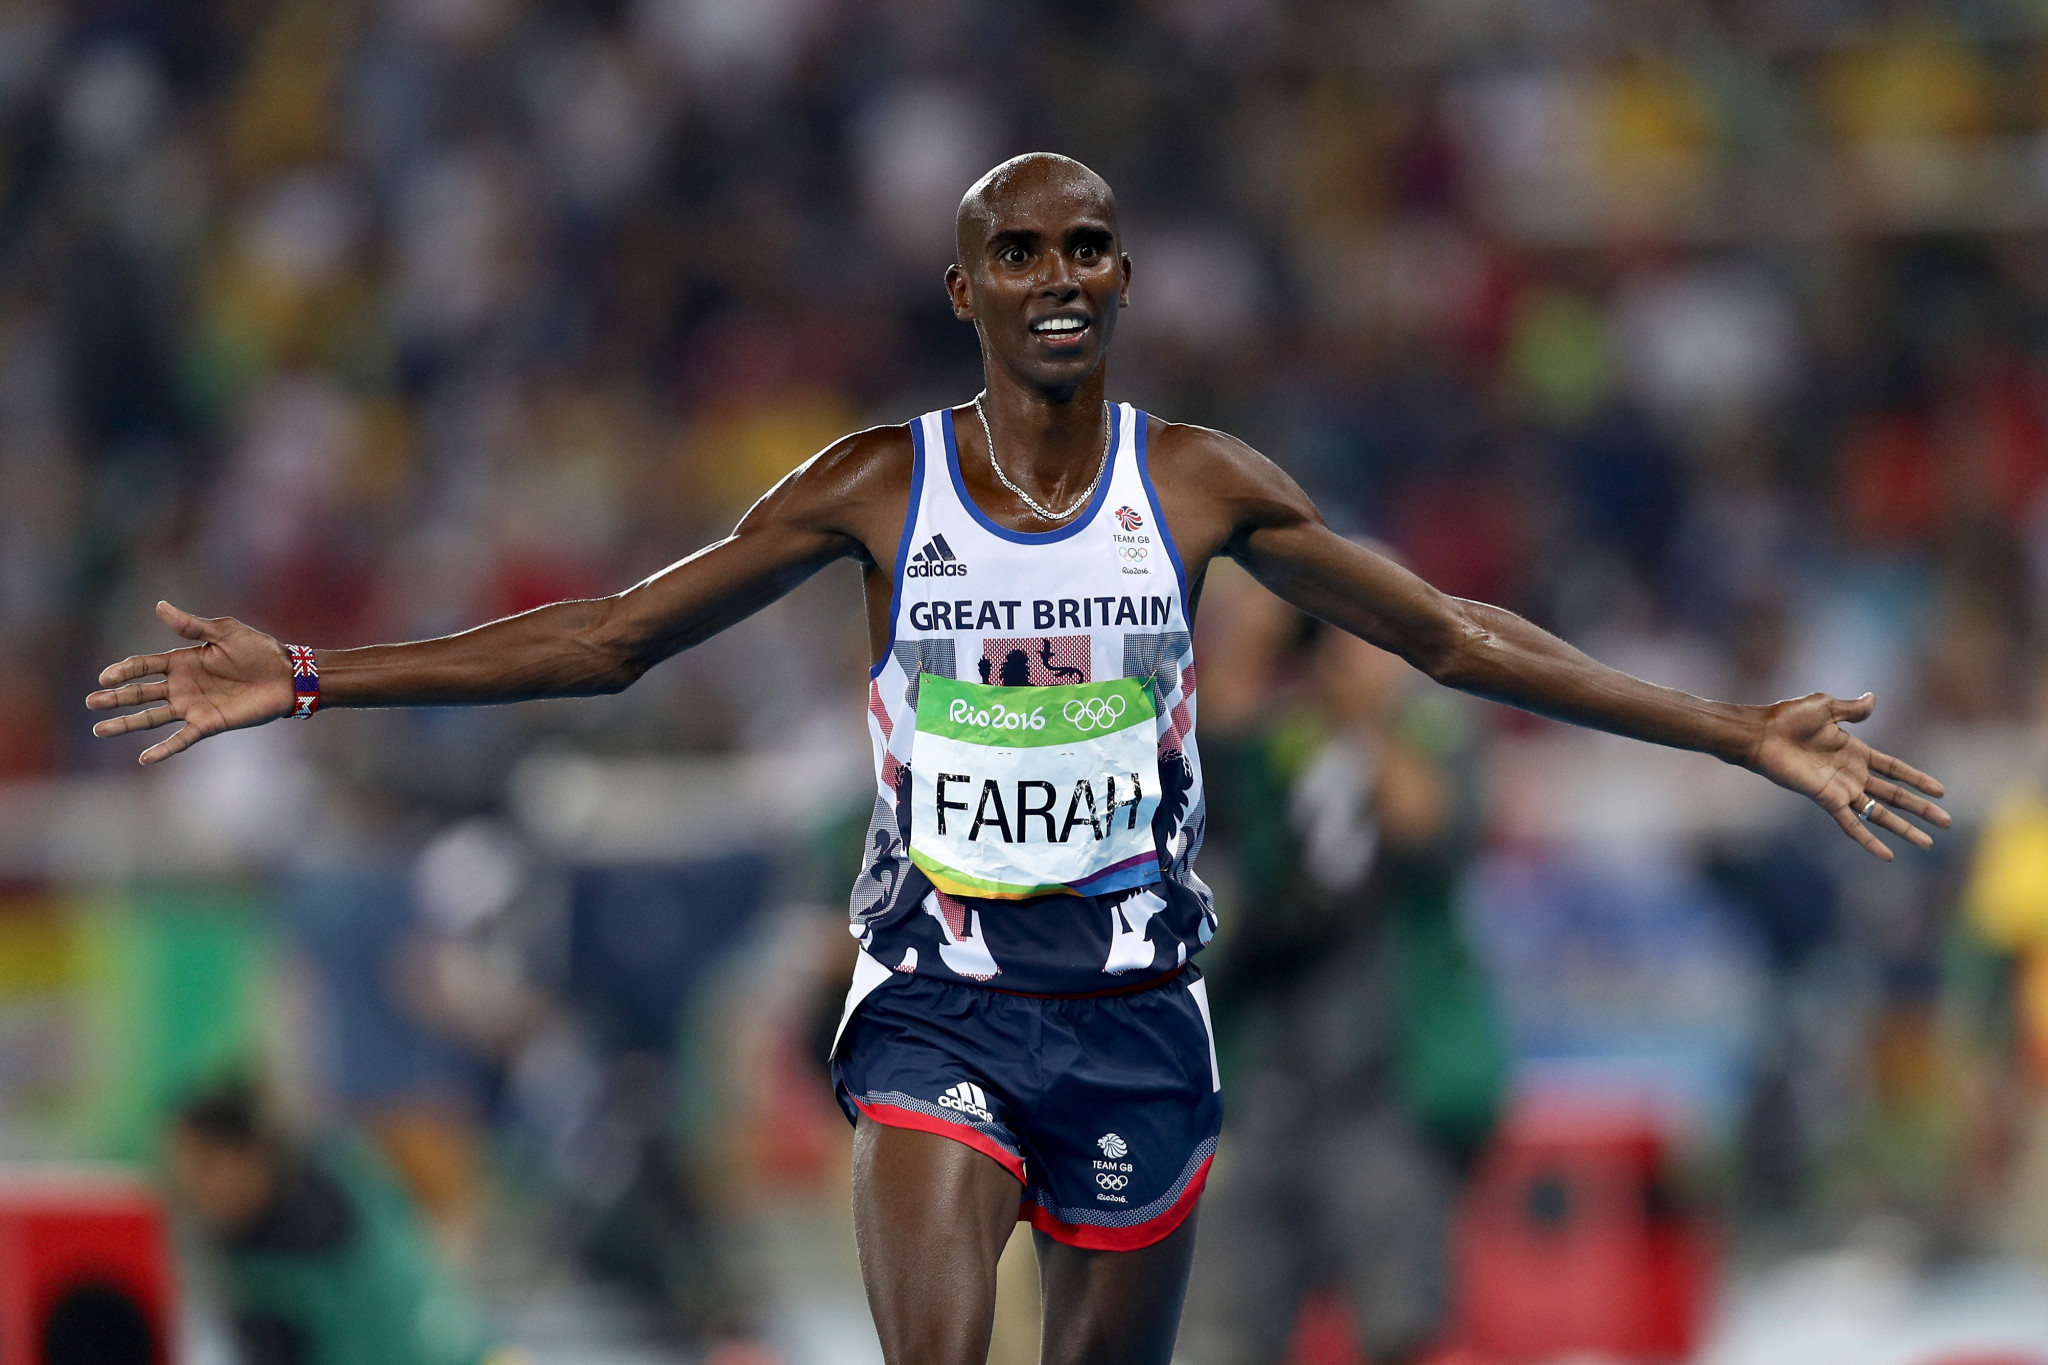 Sir Mo Farah won men's 5,000m and 10,000m Olympic gold for Britain at London 2012 and Rio 2016 ©Getty Images